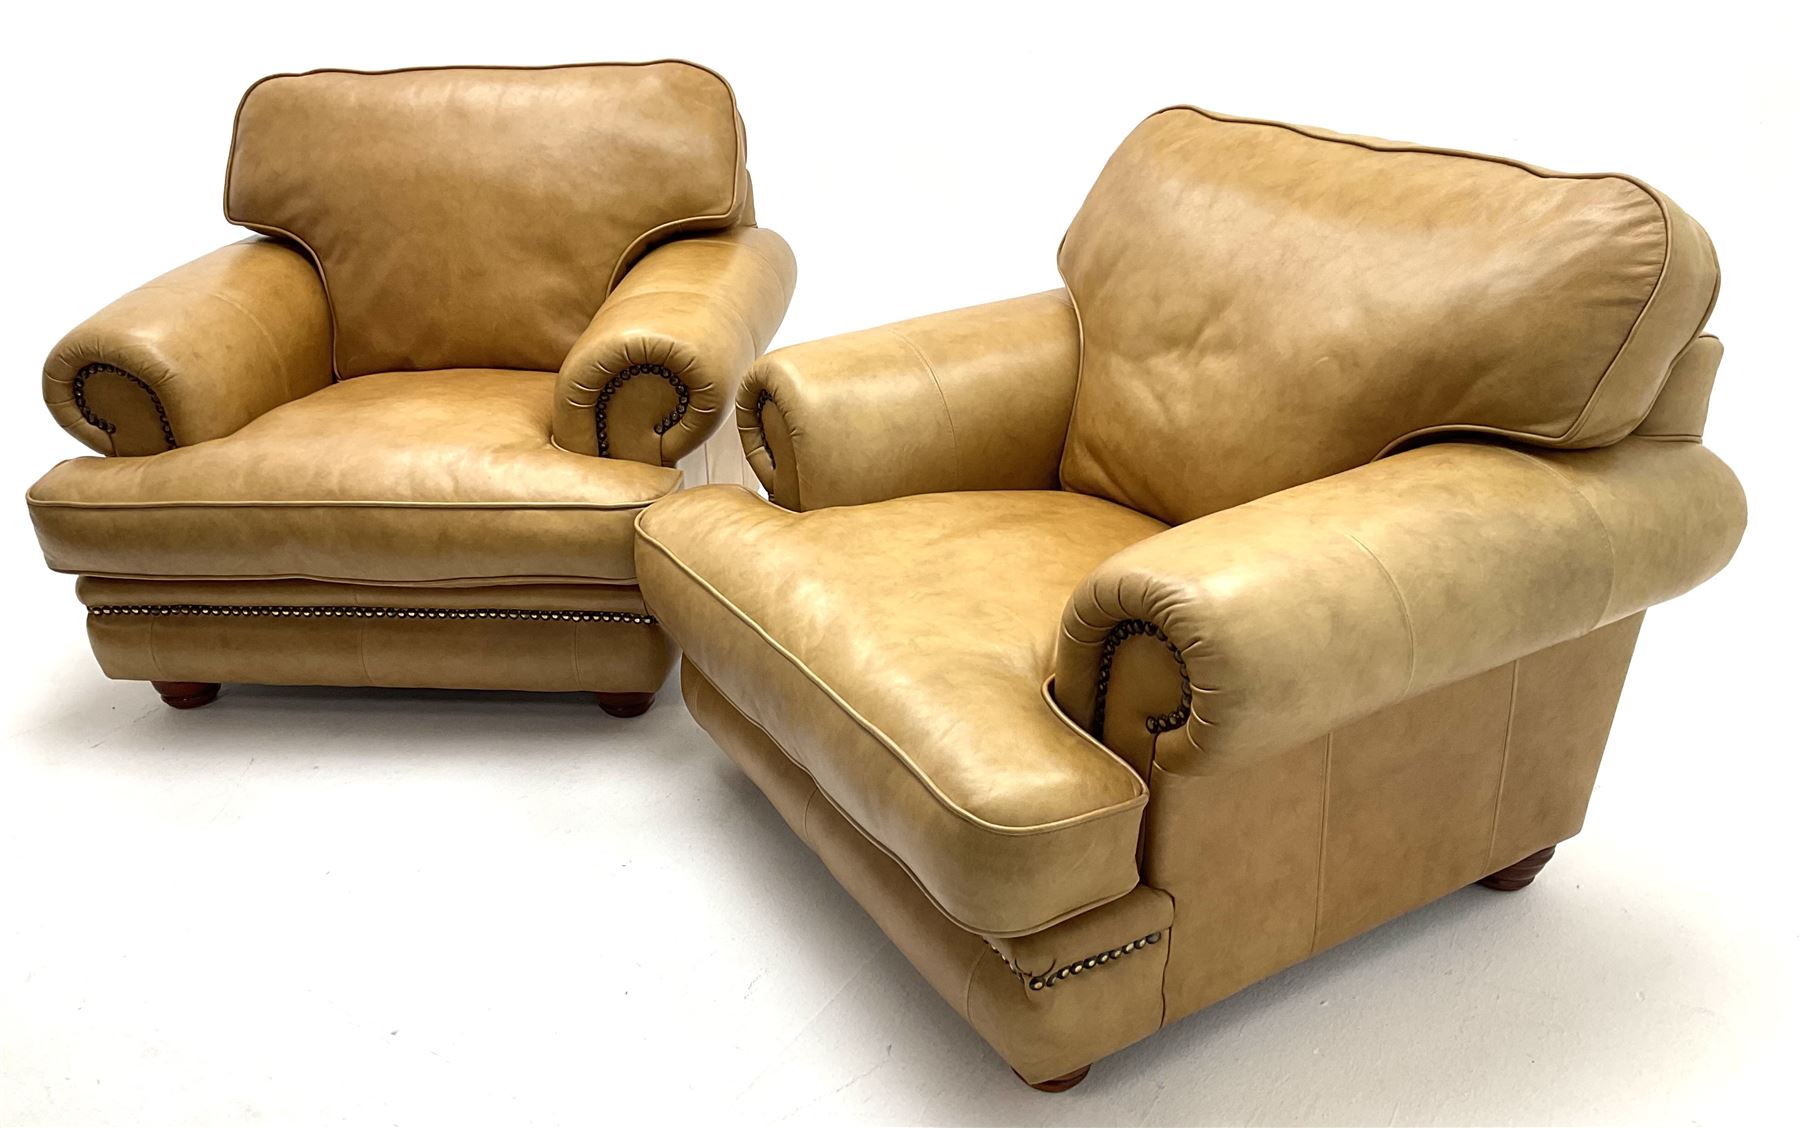 Two seat sofa upholstered in a studded tan leather - Image 6 of 7